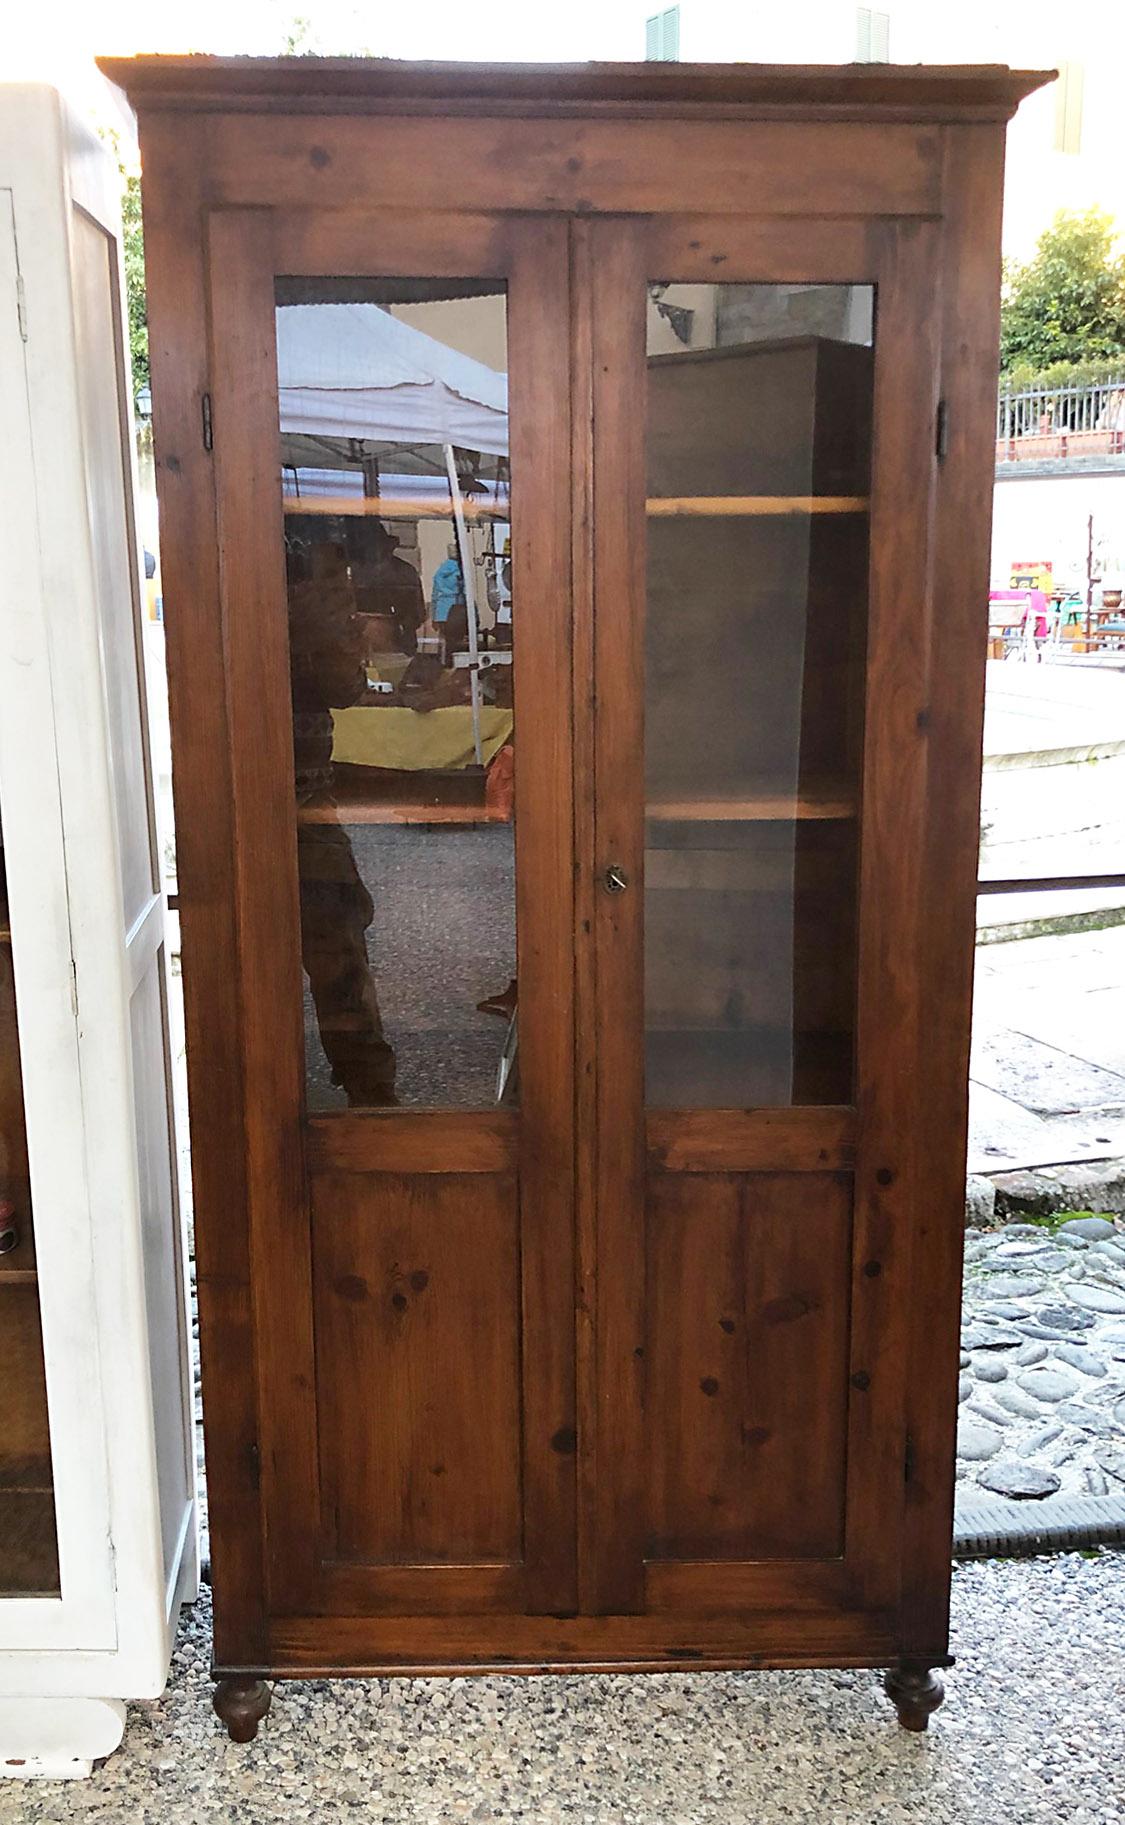 Original antique Italian fir showcase with two doors from 1880, with internal shelves, wax finished.

The width without frame is 88cm.
The transport quote for the USA and Canada is customized according to the destination, make the request with zip